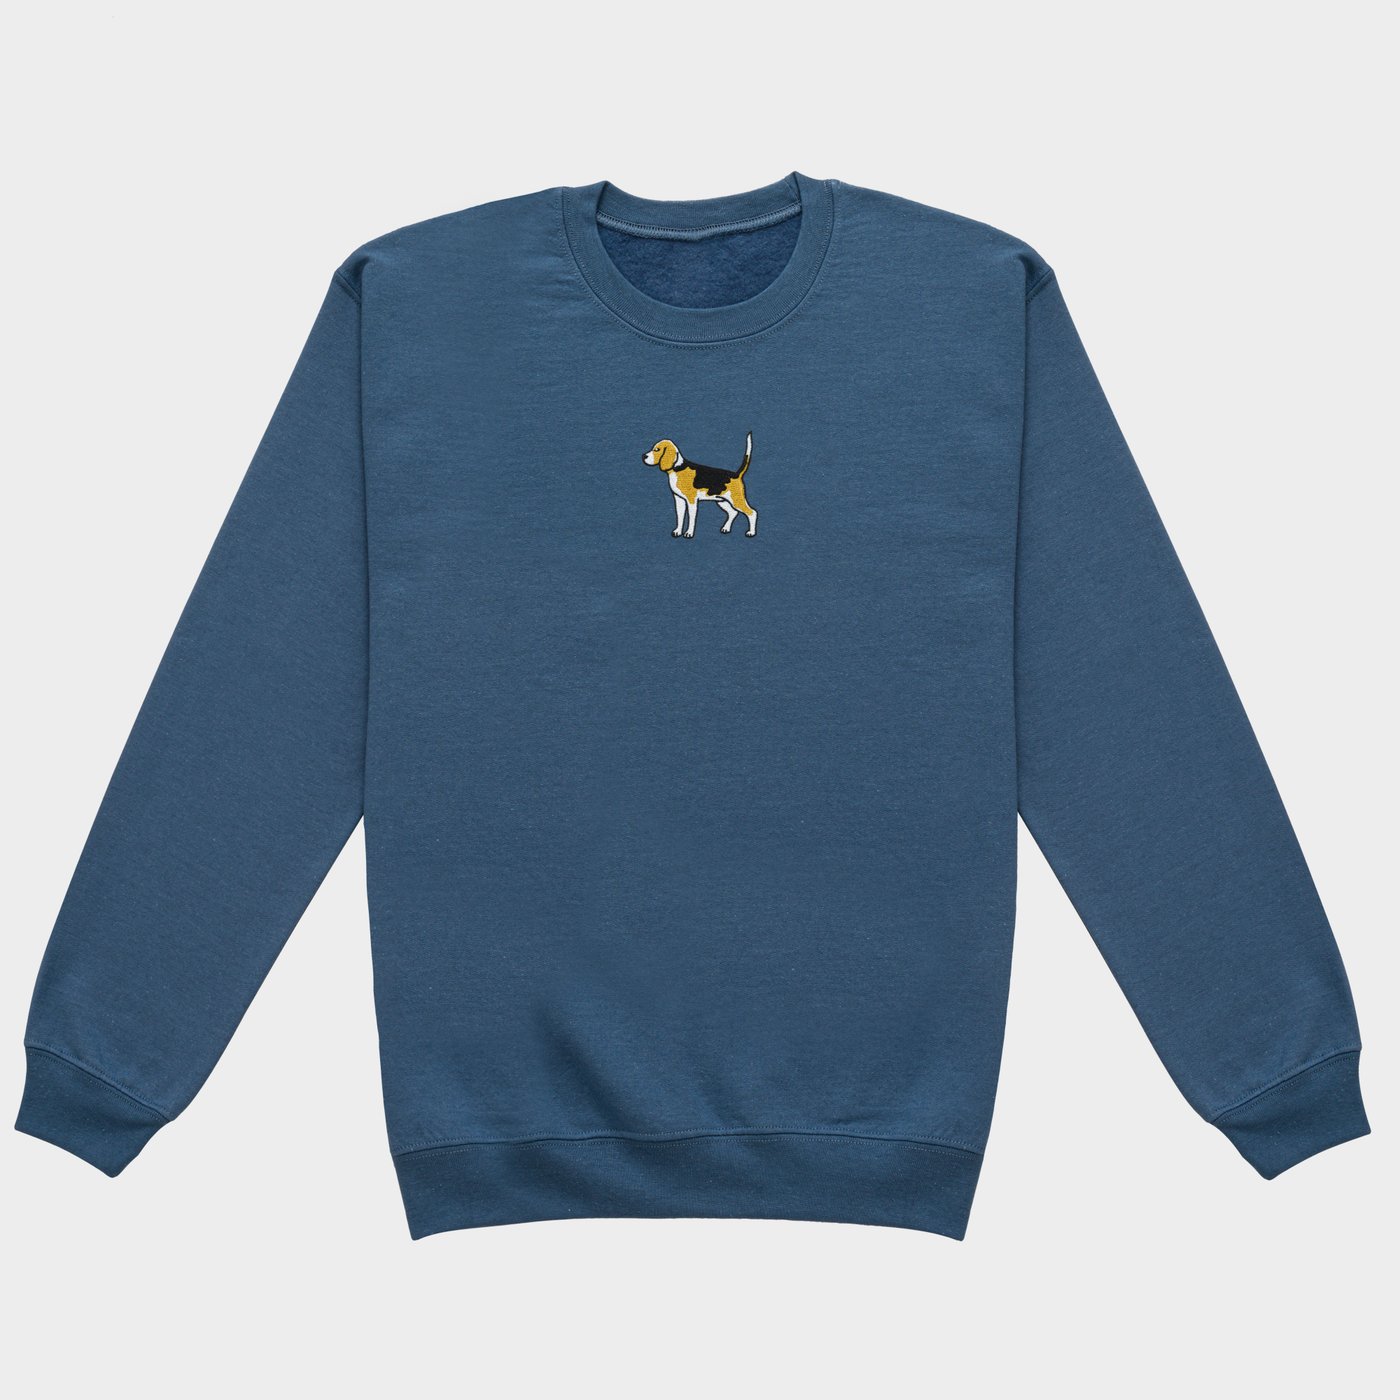 Bobby's Planet Men's Embroidered Beagle Sweatshirt from Paws Dog Cat Animals Collection in Indigo Blue Color#color_indigo-blue